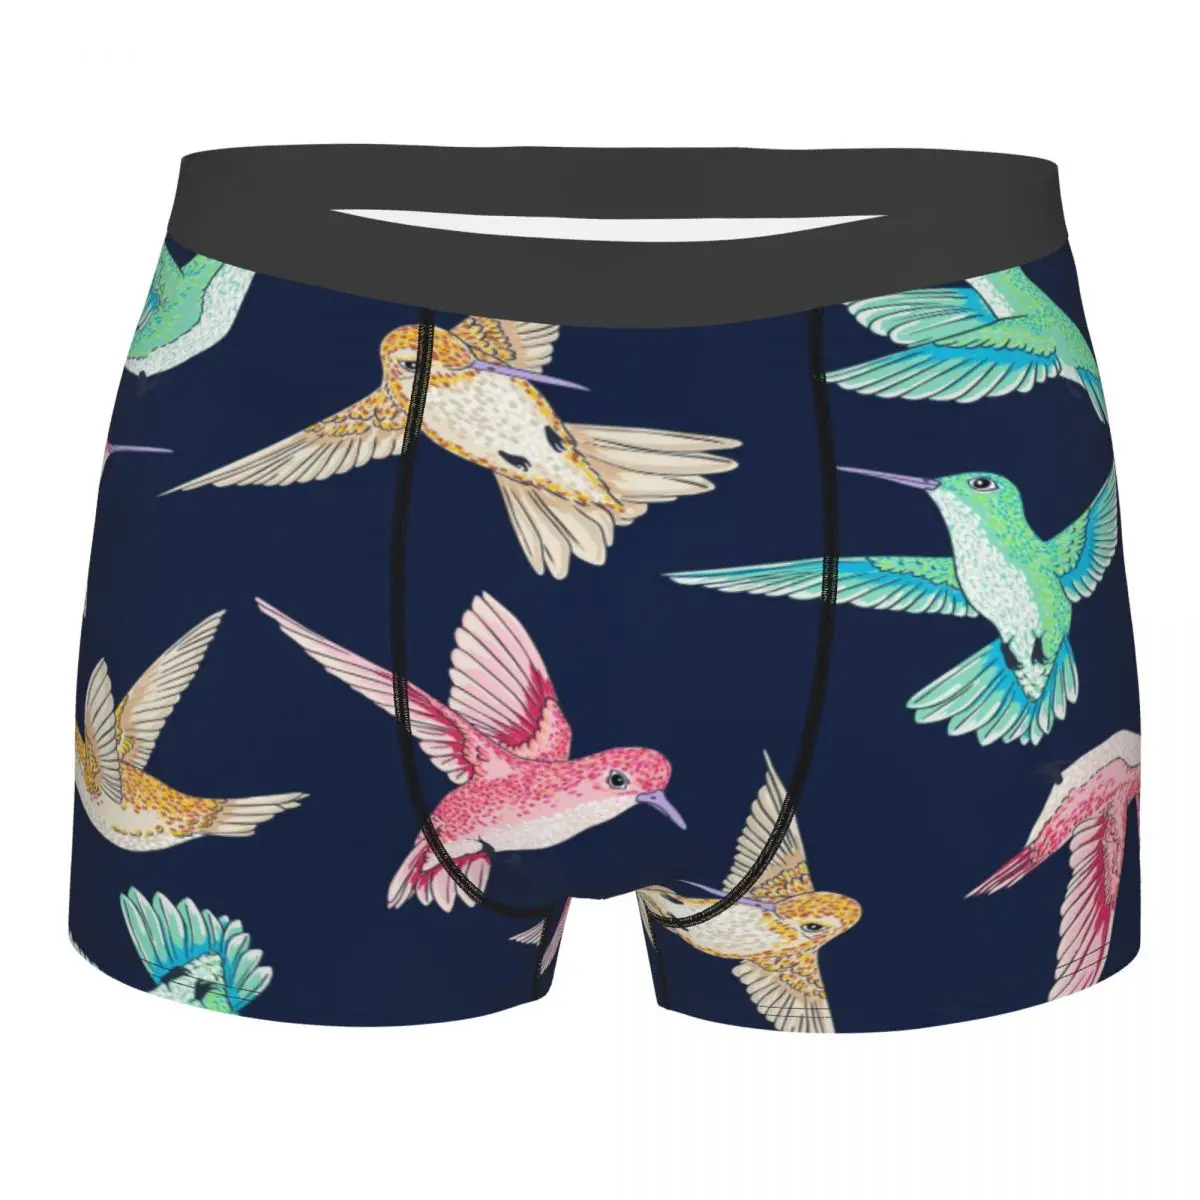 

Men's Panties Underpants Boxershorts Flying Birds Of Paradise Conversational Underwear for Man Sexy Male Boxer Shorts